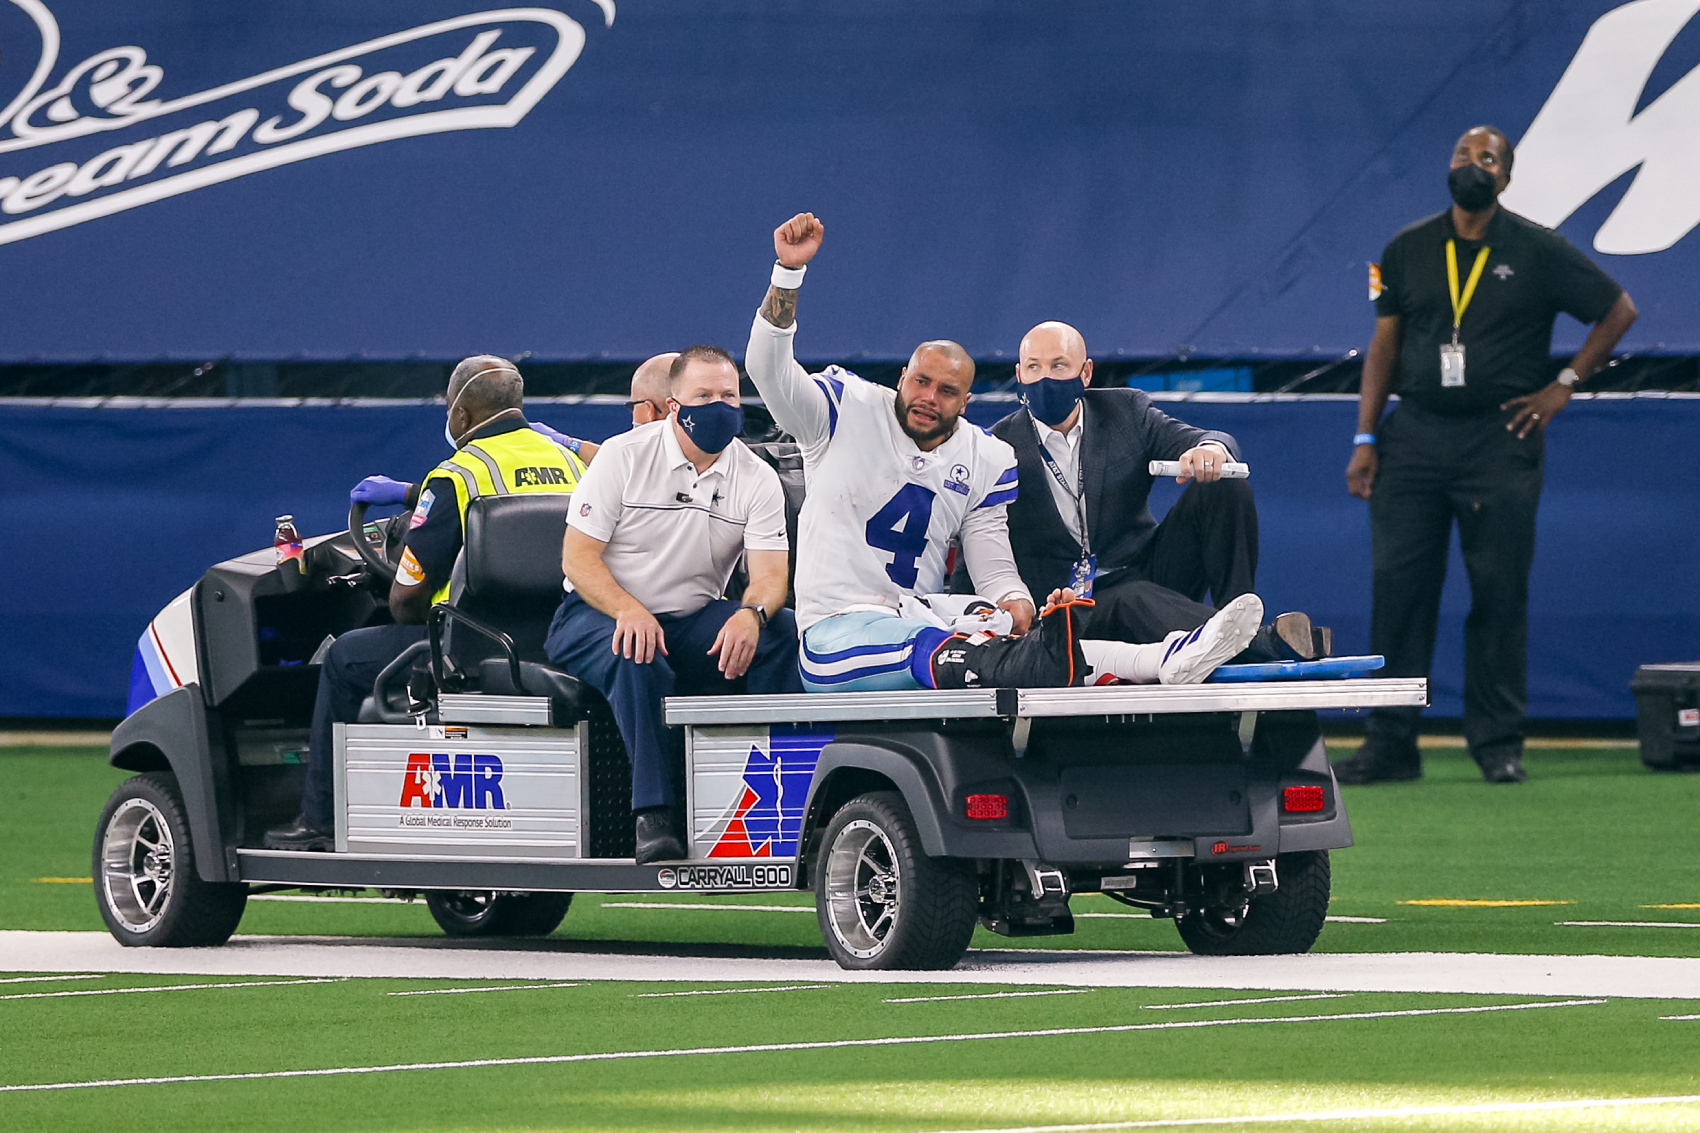 Dallas Cowboys QB Dak Prescott recently suffered a gruesome injury. He has since received a compassionate offer from an NBA star.